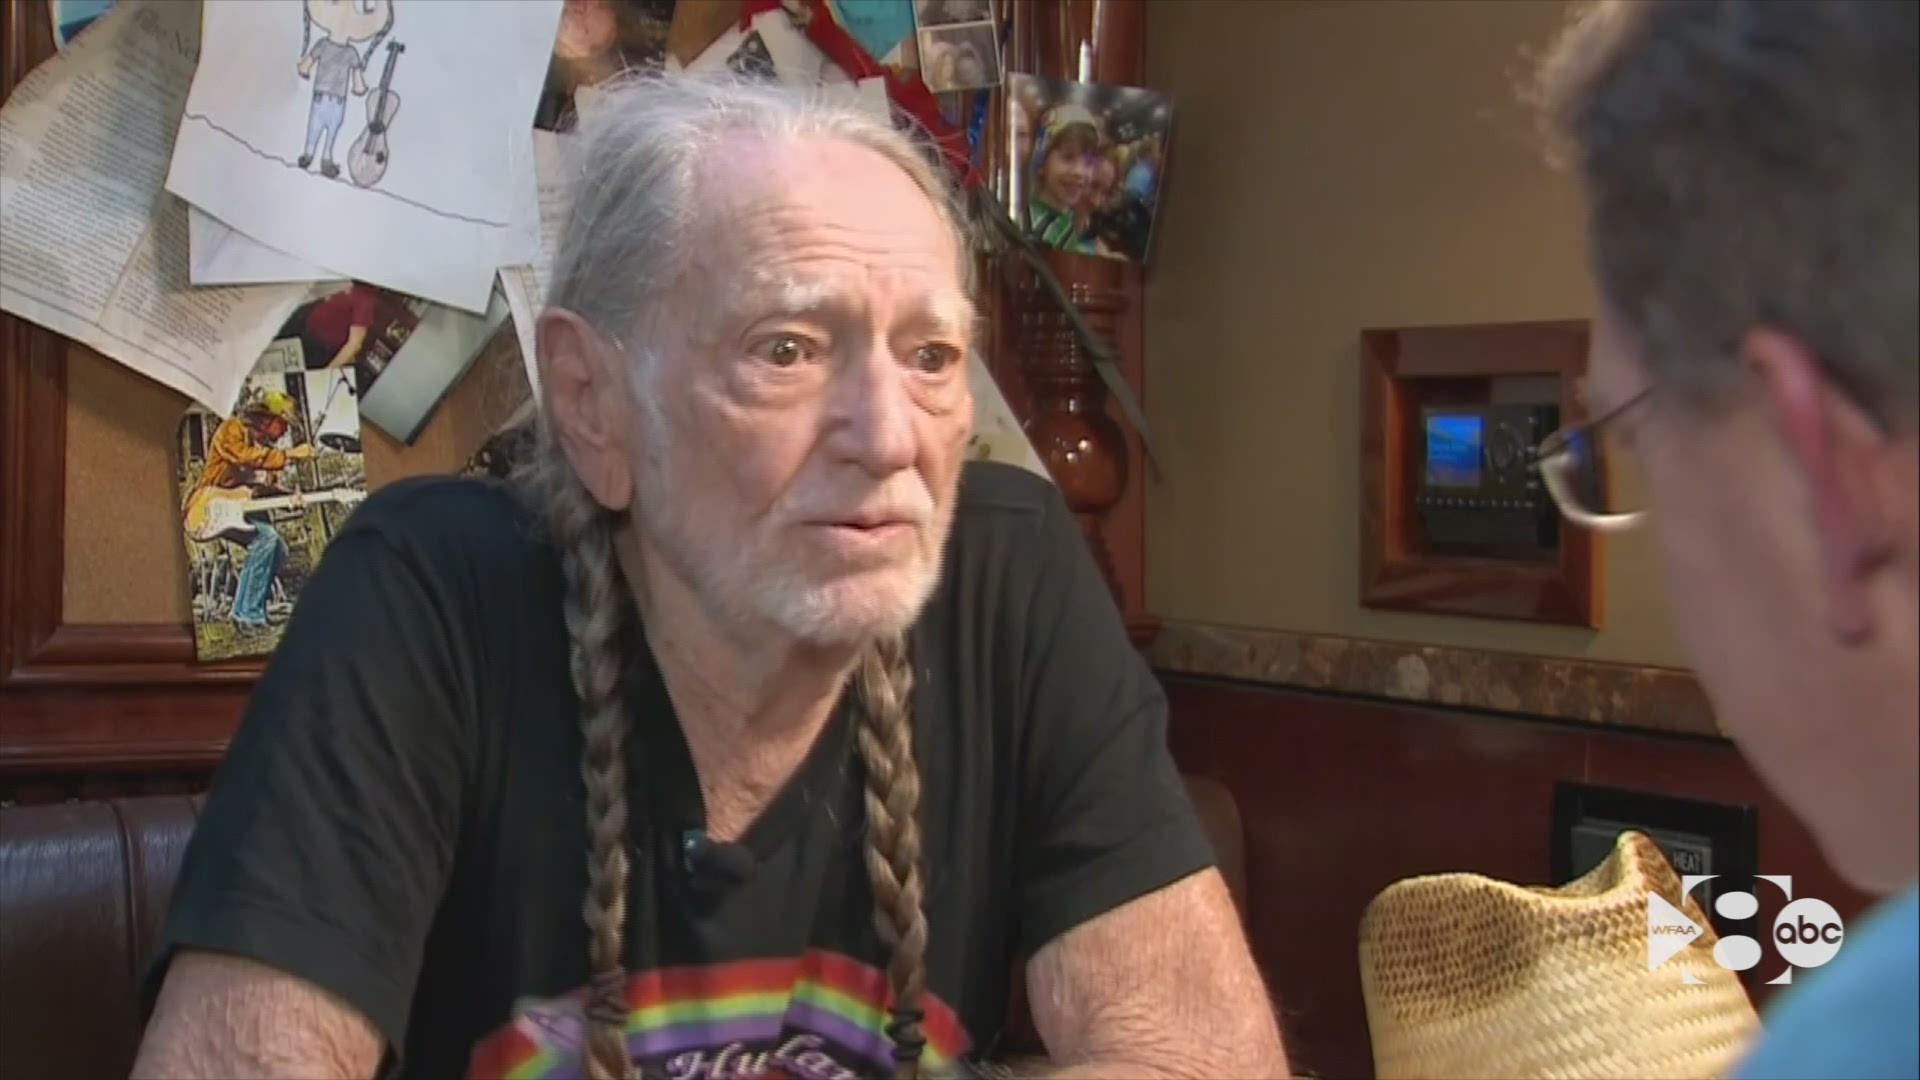 The country music legend sat down with WFAA before his show at Billy Bob's Texas on Saturday night.